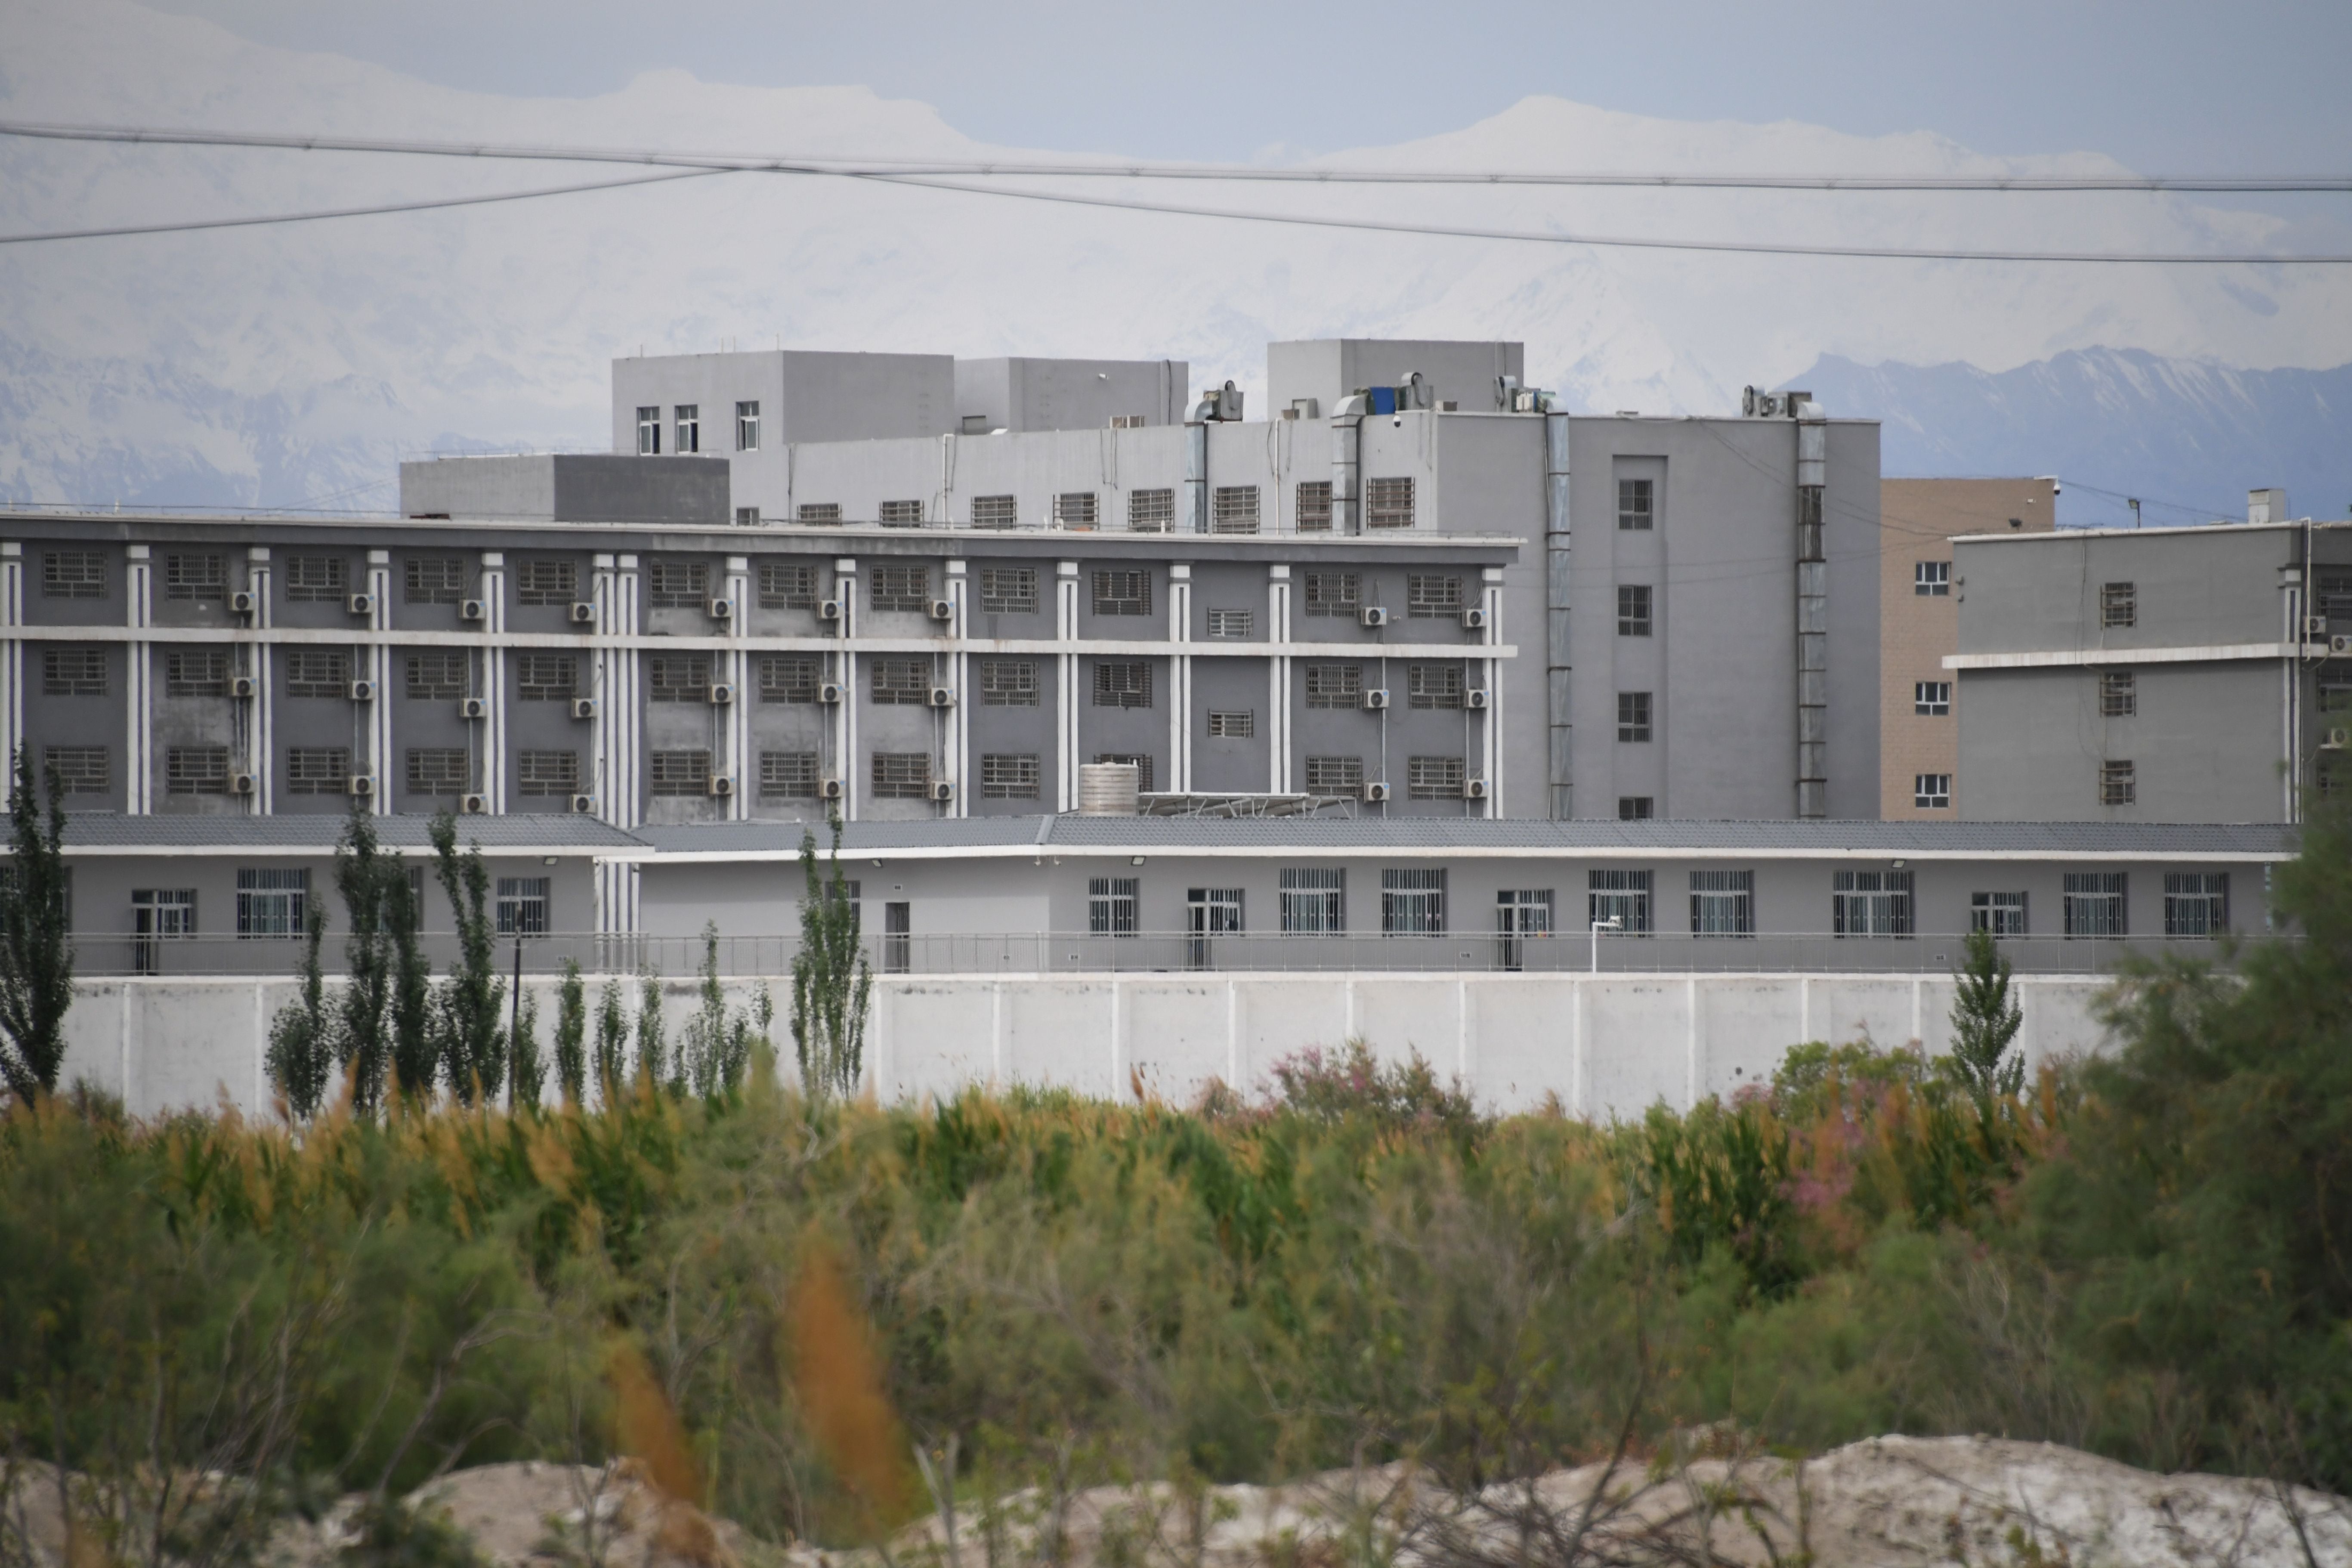 File Image: This photo taken on 4 June 2019 shows a facility believed to be a re-education camp where mostly Muslim ethnic minorities are detained, north of Akto in China's northwestern Xinjiang region